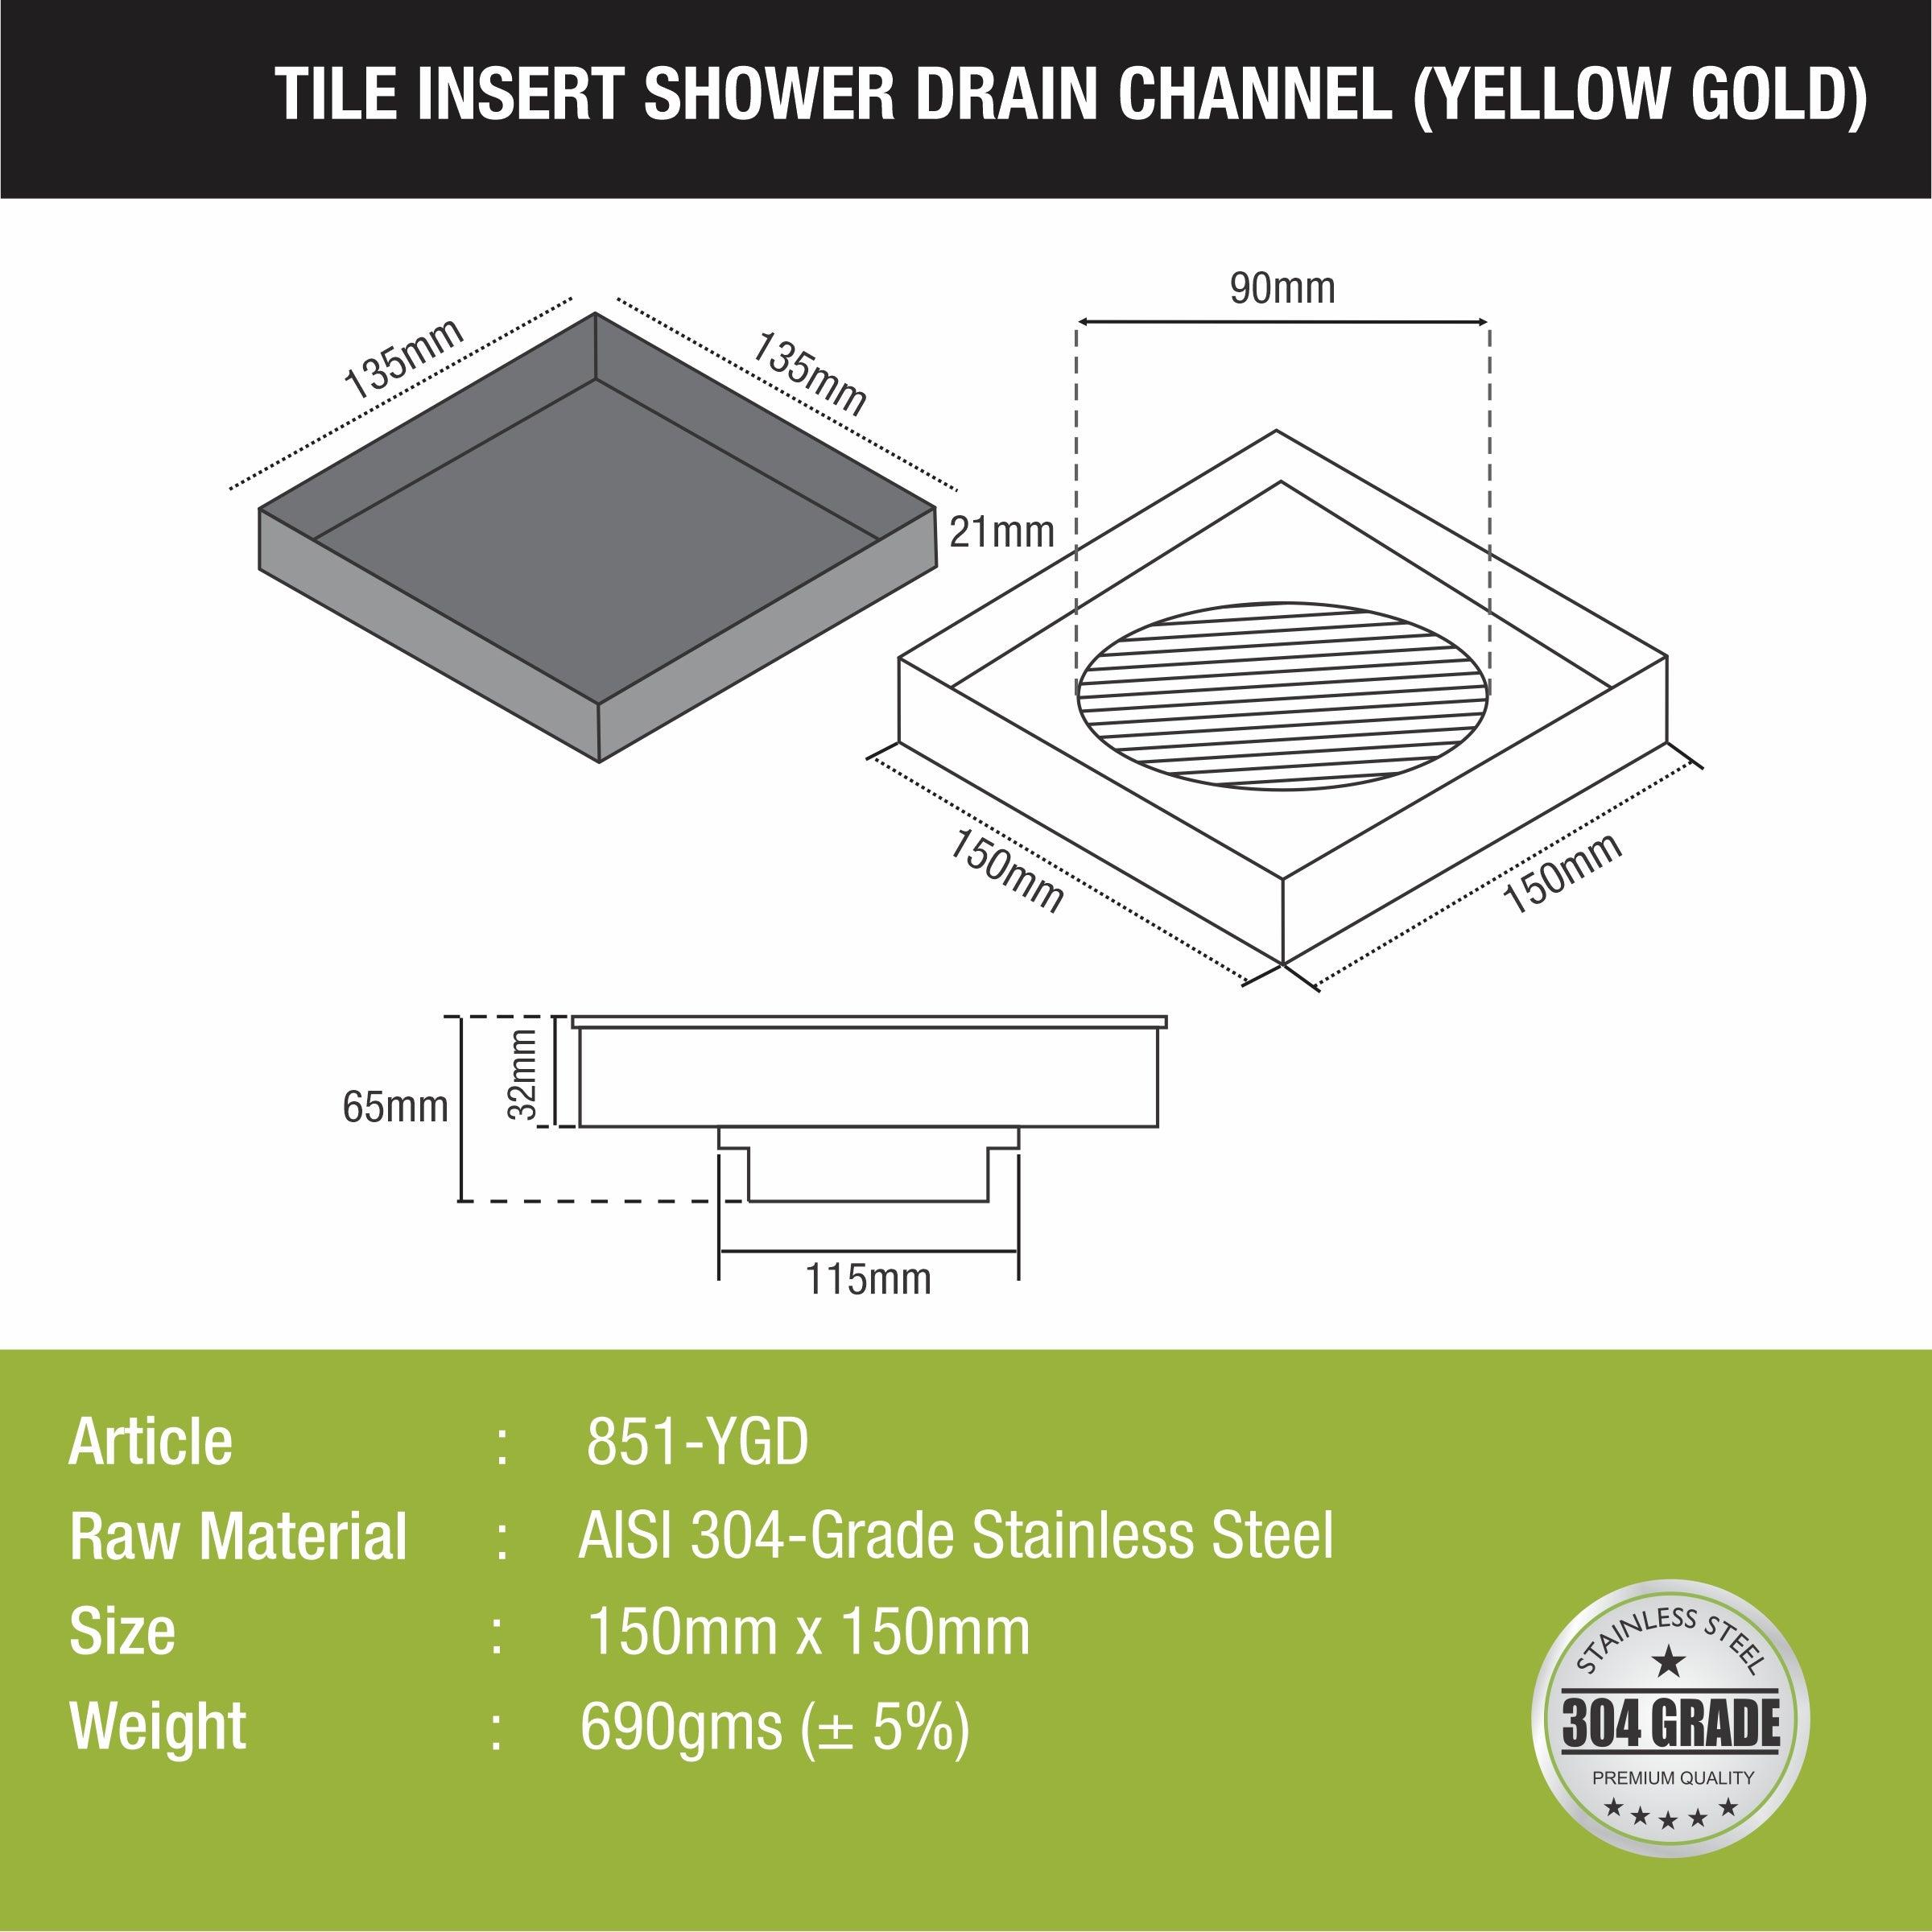 Tile Insert Square Floor Drain - Yellow Gold (6 x 6 Inches) sizes and dimensions